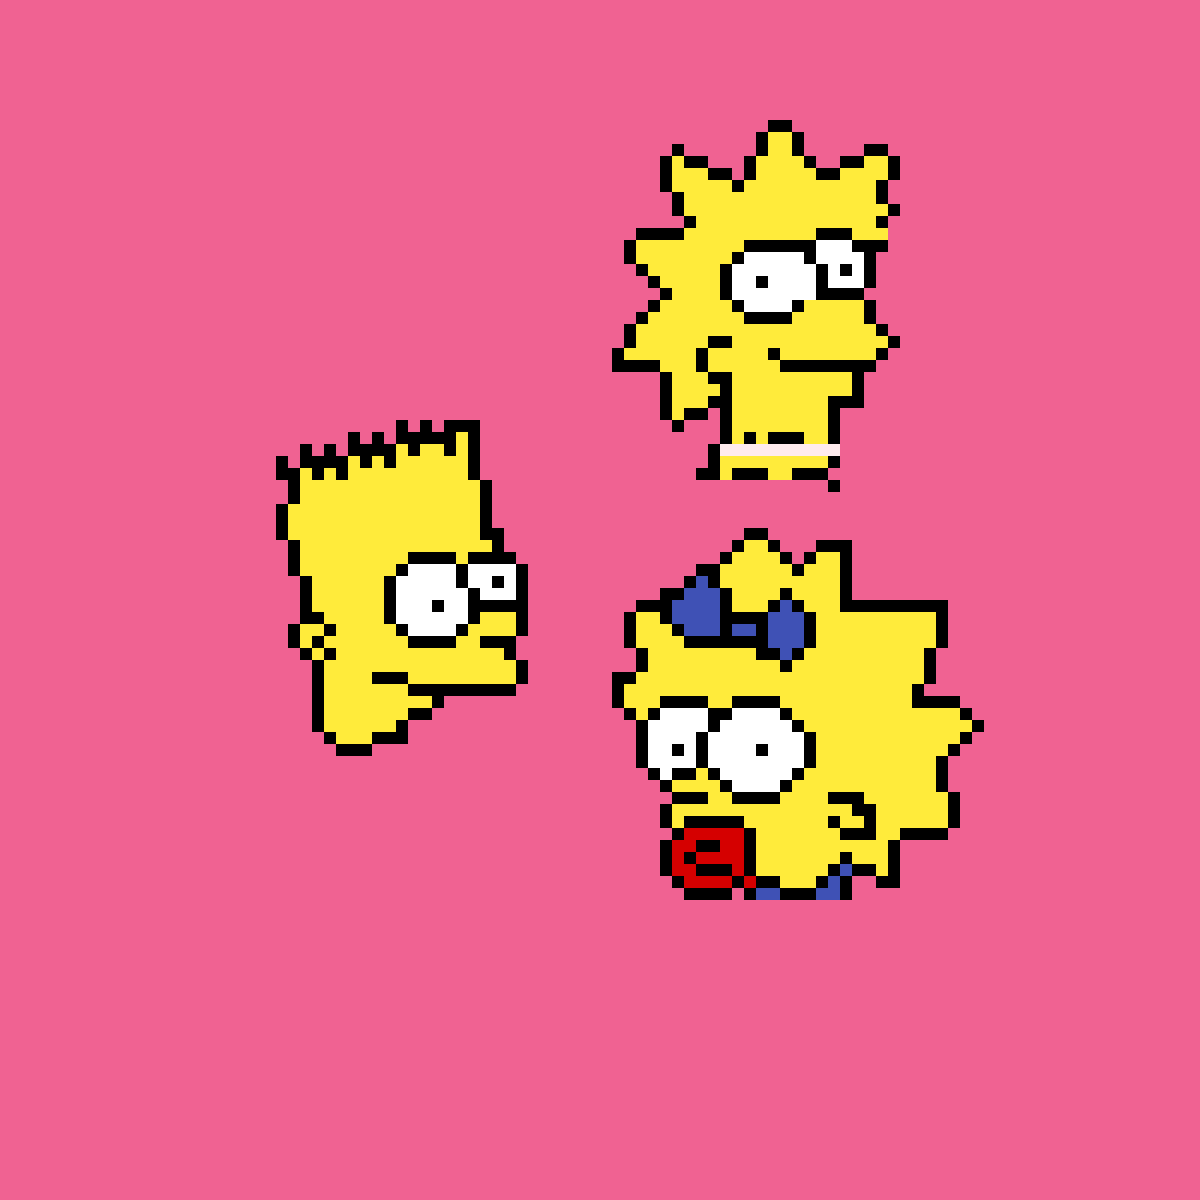 Maggie Simpson in a pink background - The Simpsons